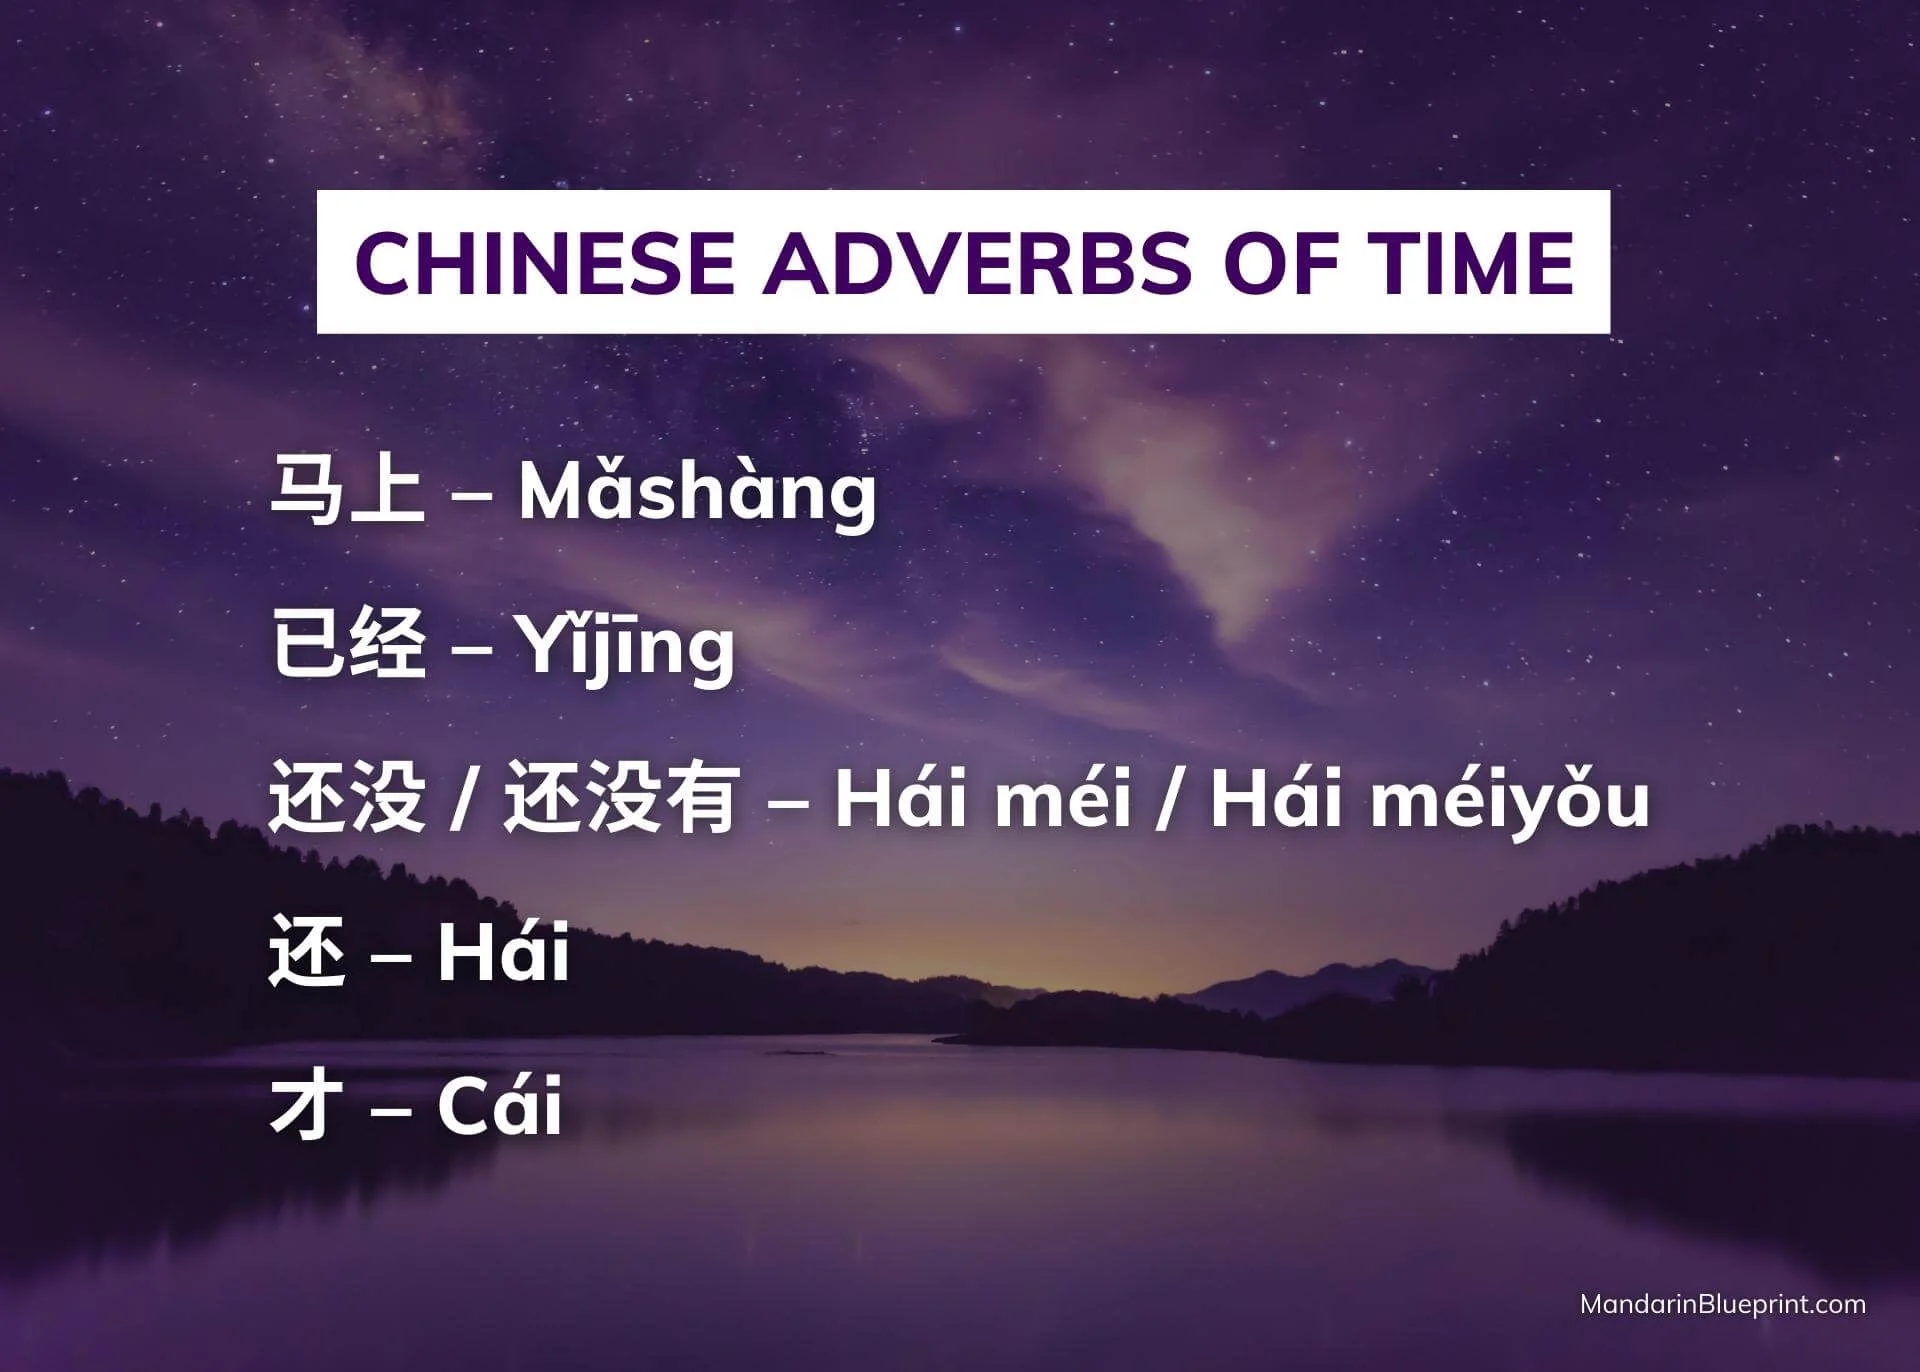 Chinese adverbs of time